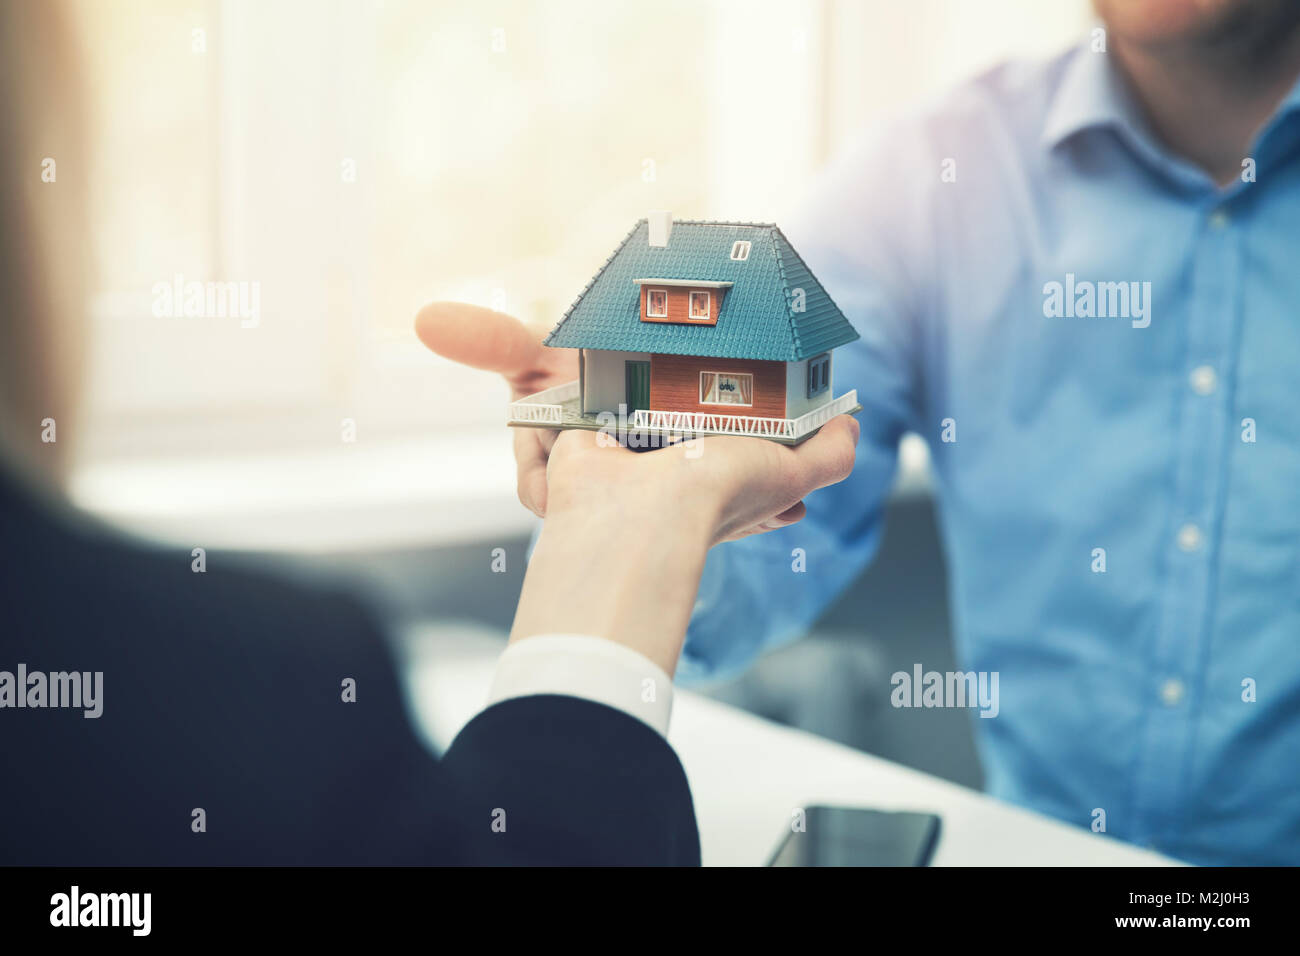 real estate agent or architect presenting house model to customer Stock Photo